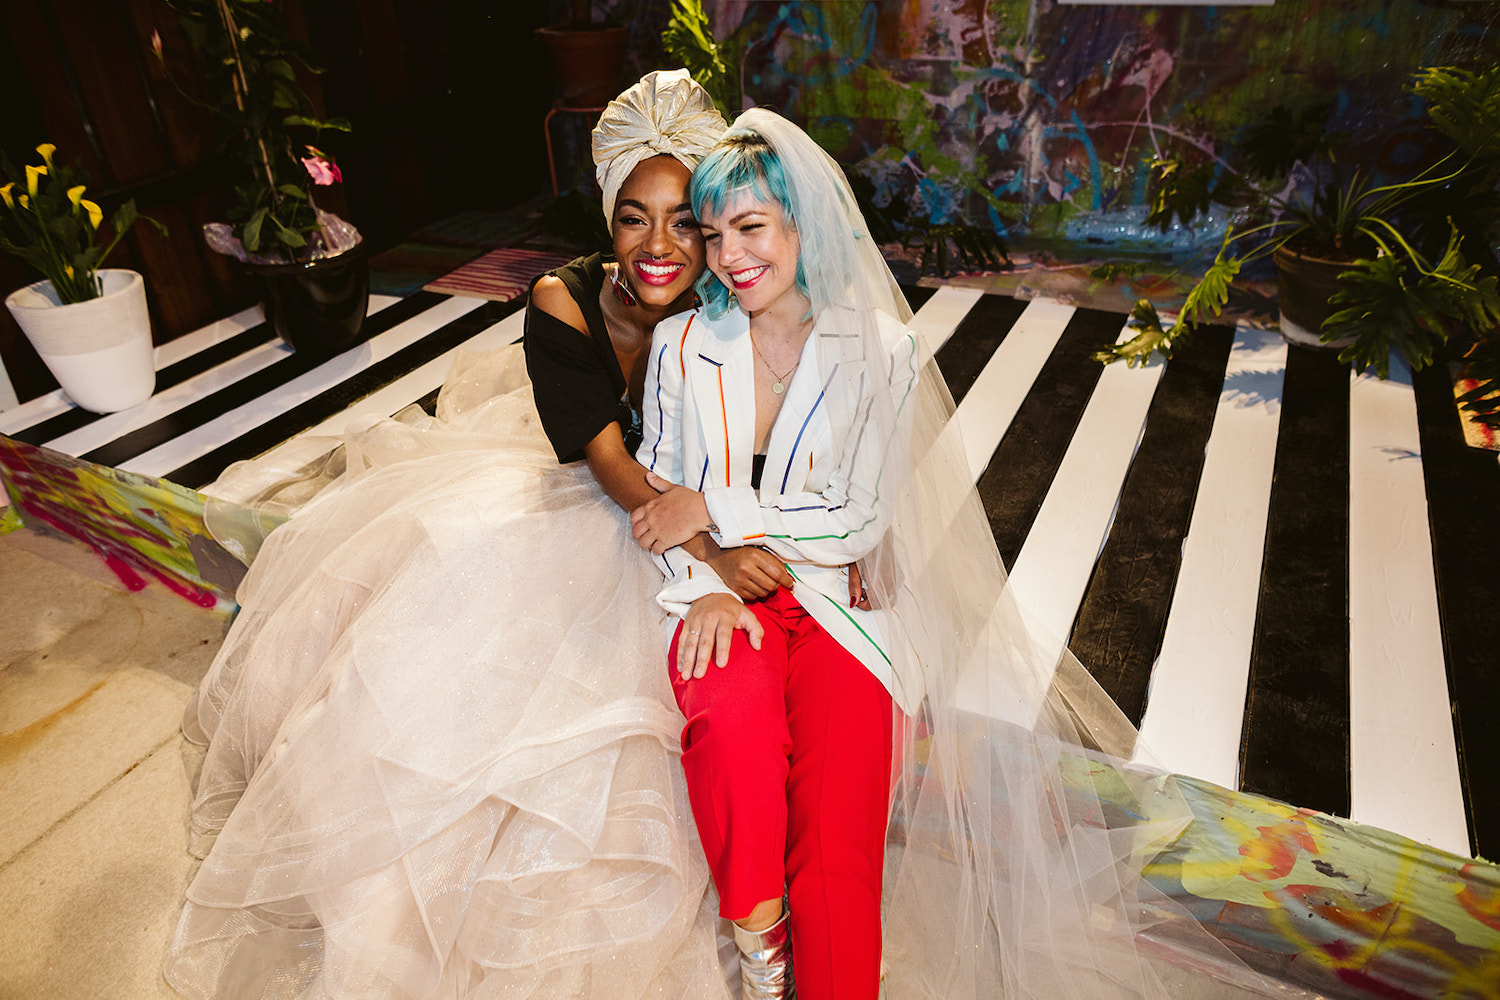 lesbian brides sit closely on an artistically painted platform with potted plants around them at LGBTQ wedding styled shoot